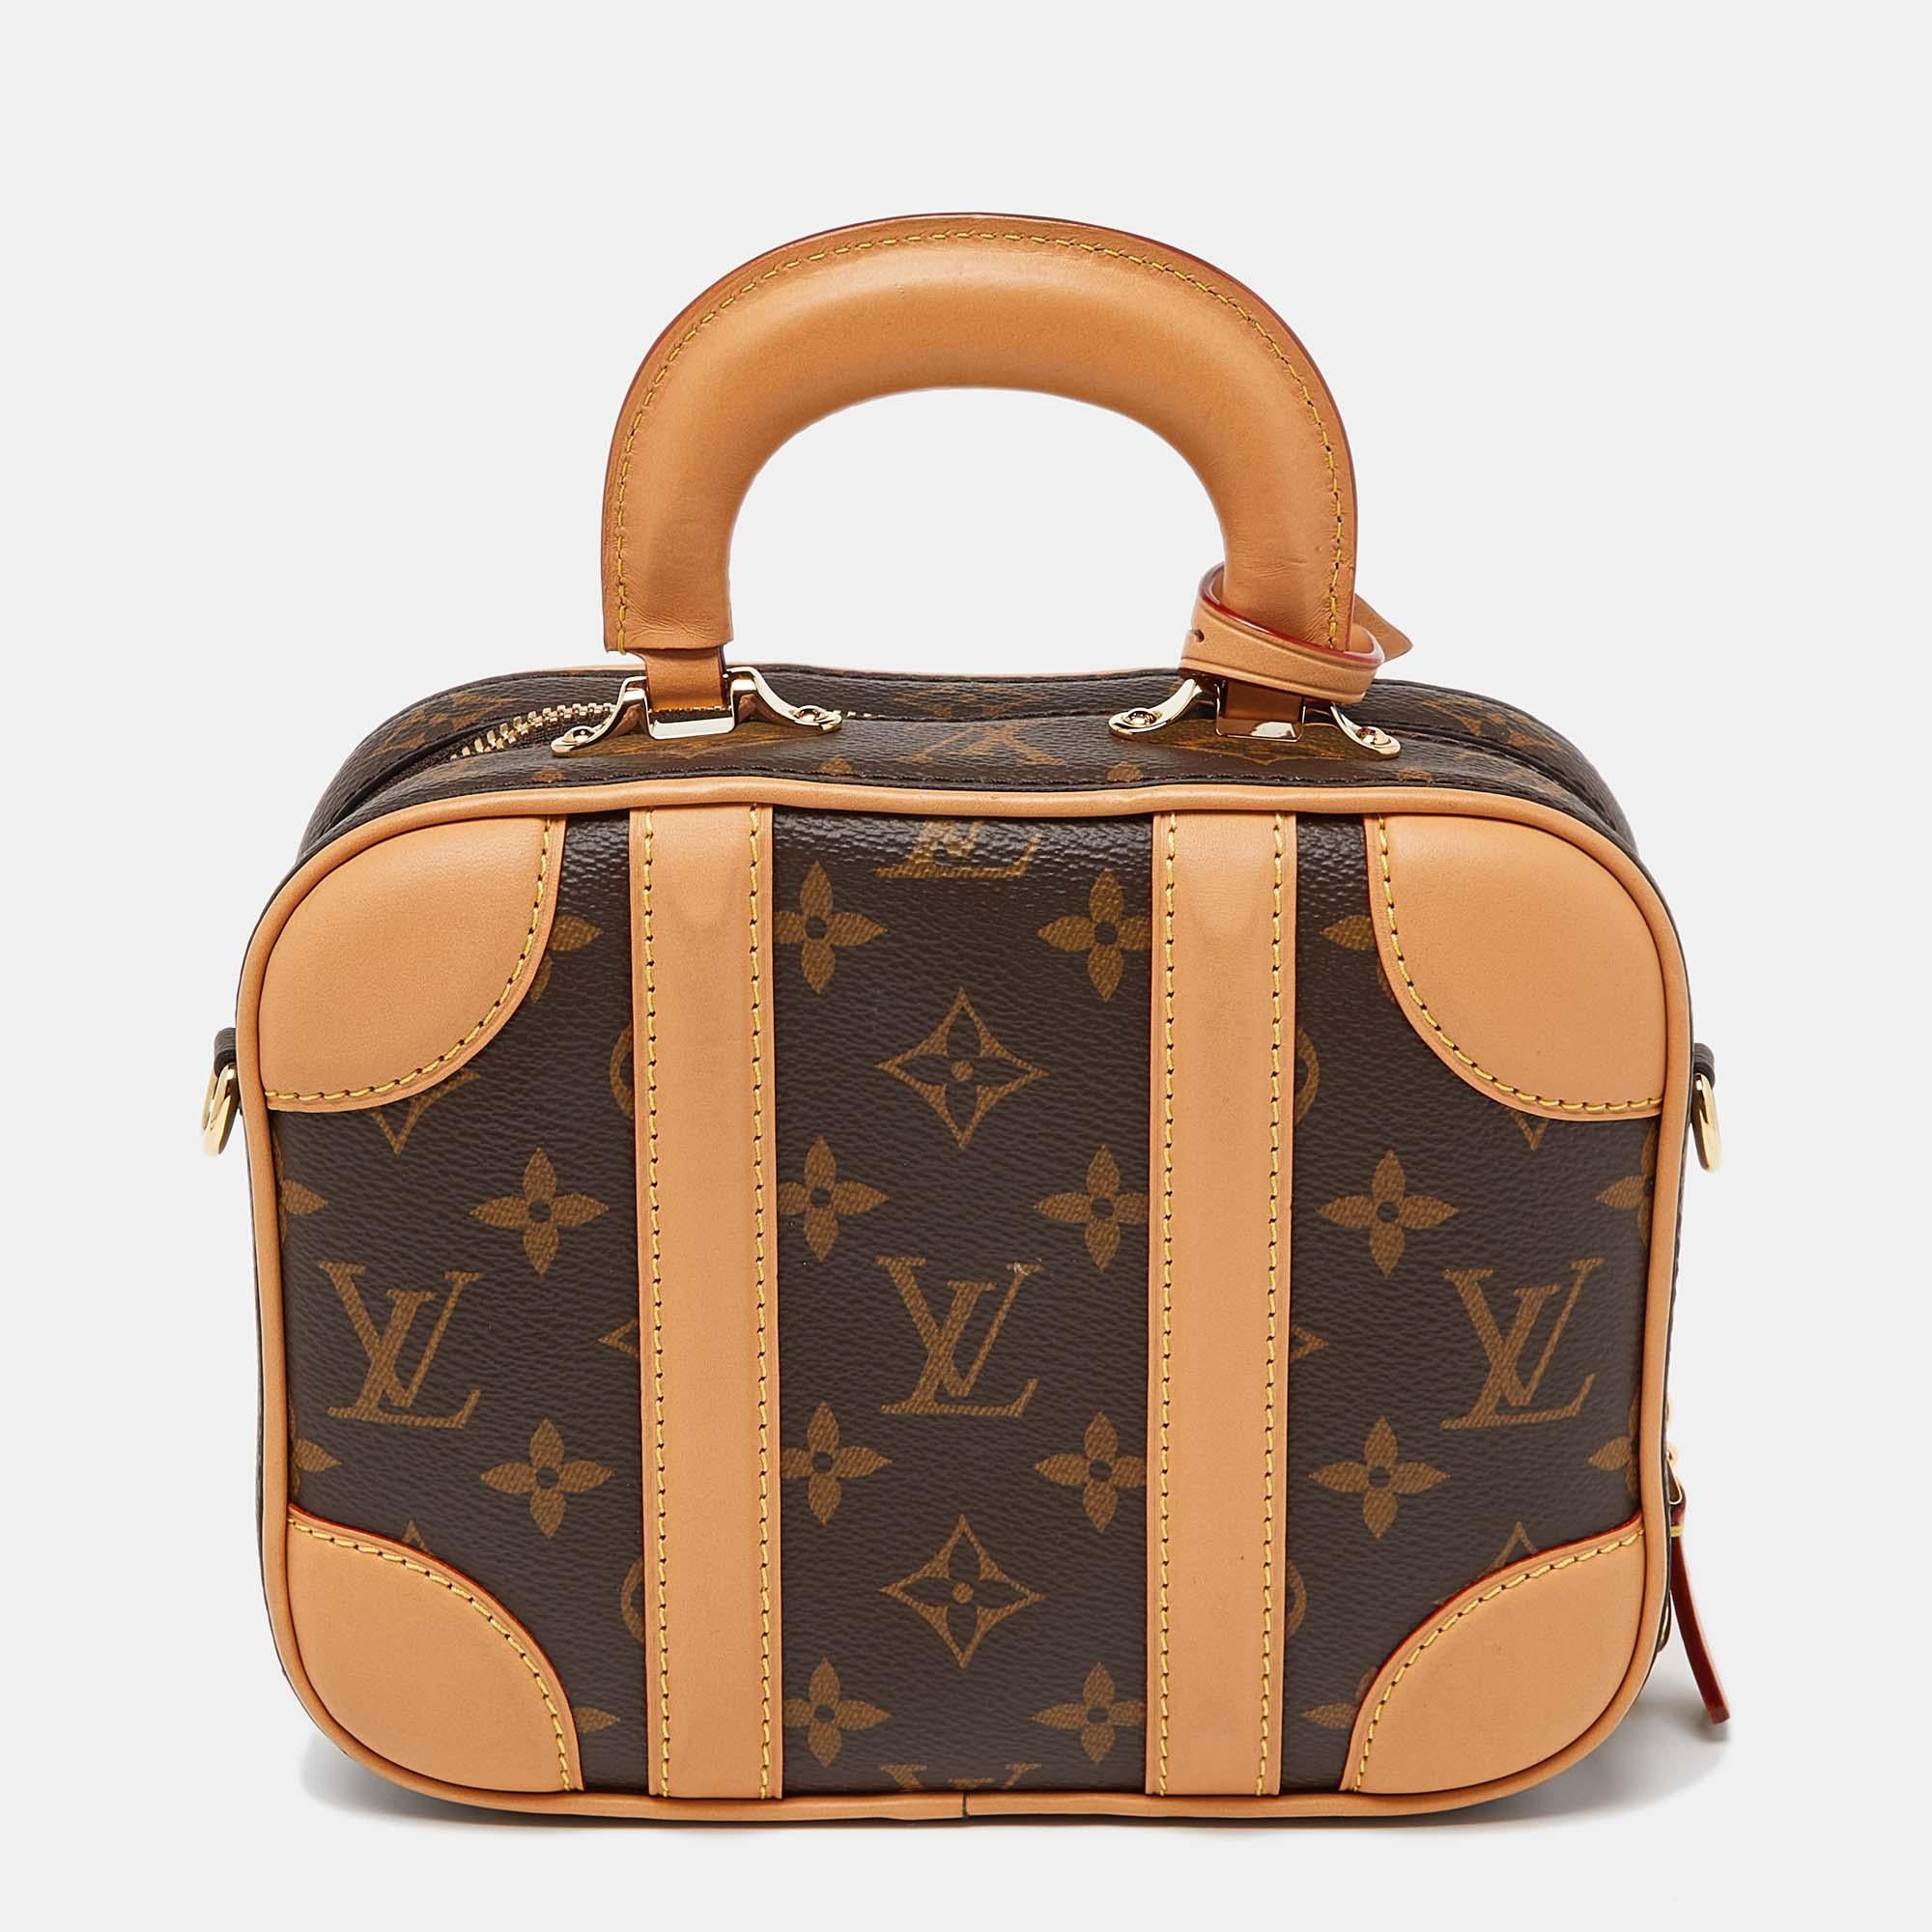 The Louis Vuitton Valisette BB is like a sized-down suitcase bag that's just right for everyday use. It is sewn using Monogram canvas and contrasted with leather trims, a small handle, and a detachable strap.

